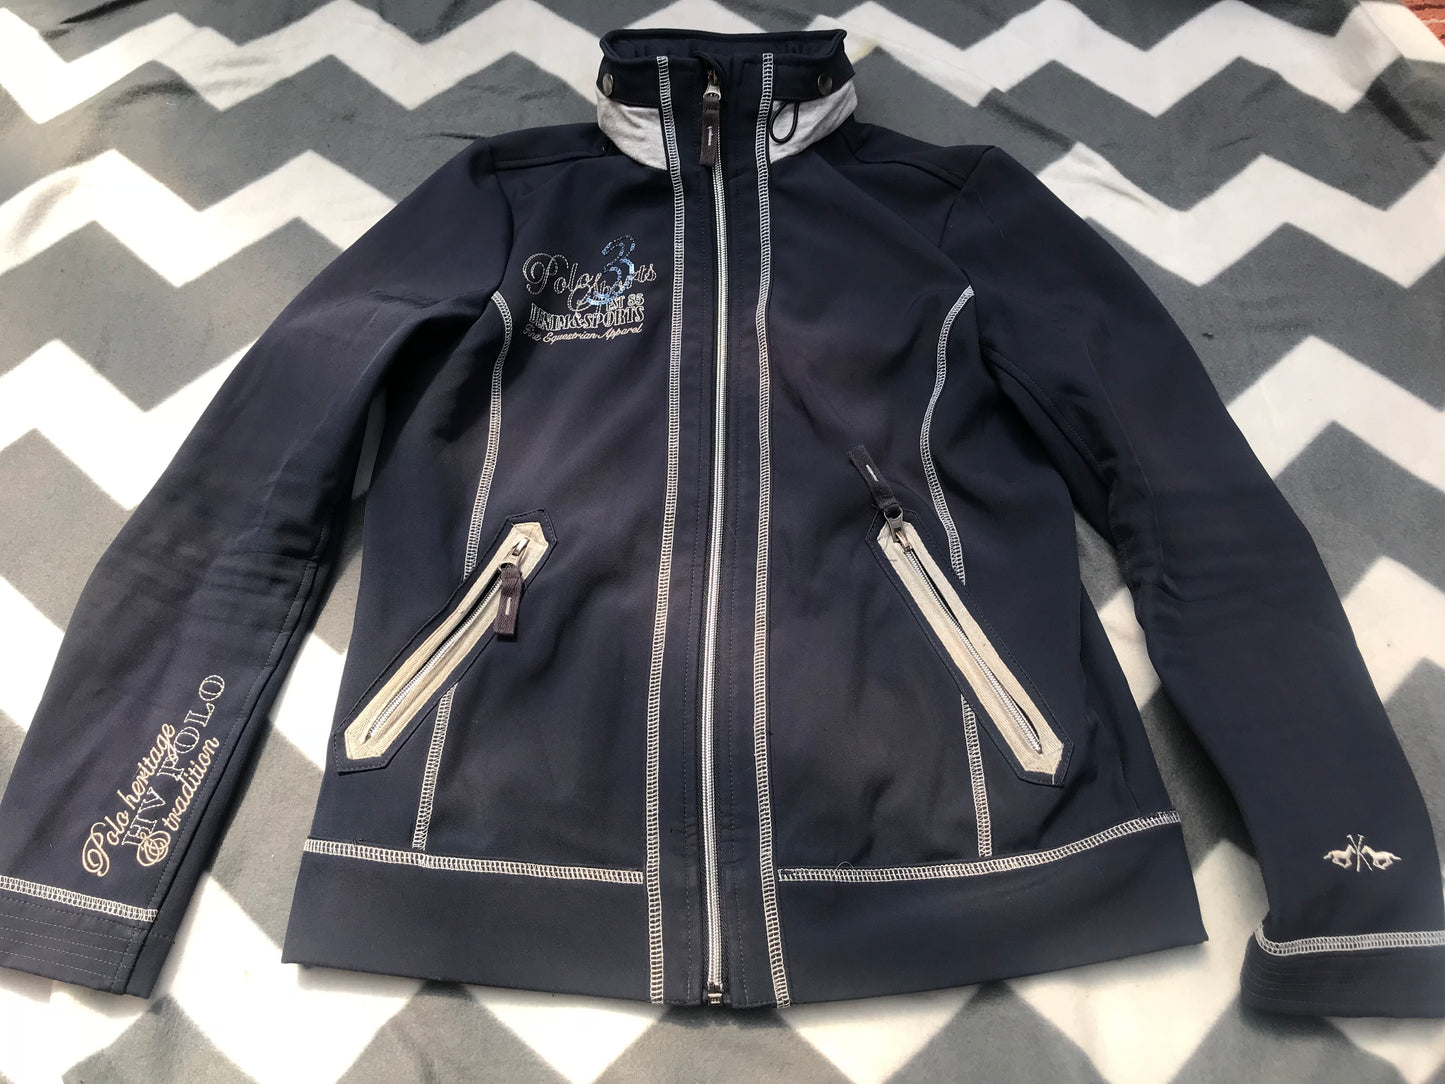 Hv polo navy zip up jacket size small FREE POSTAGE